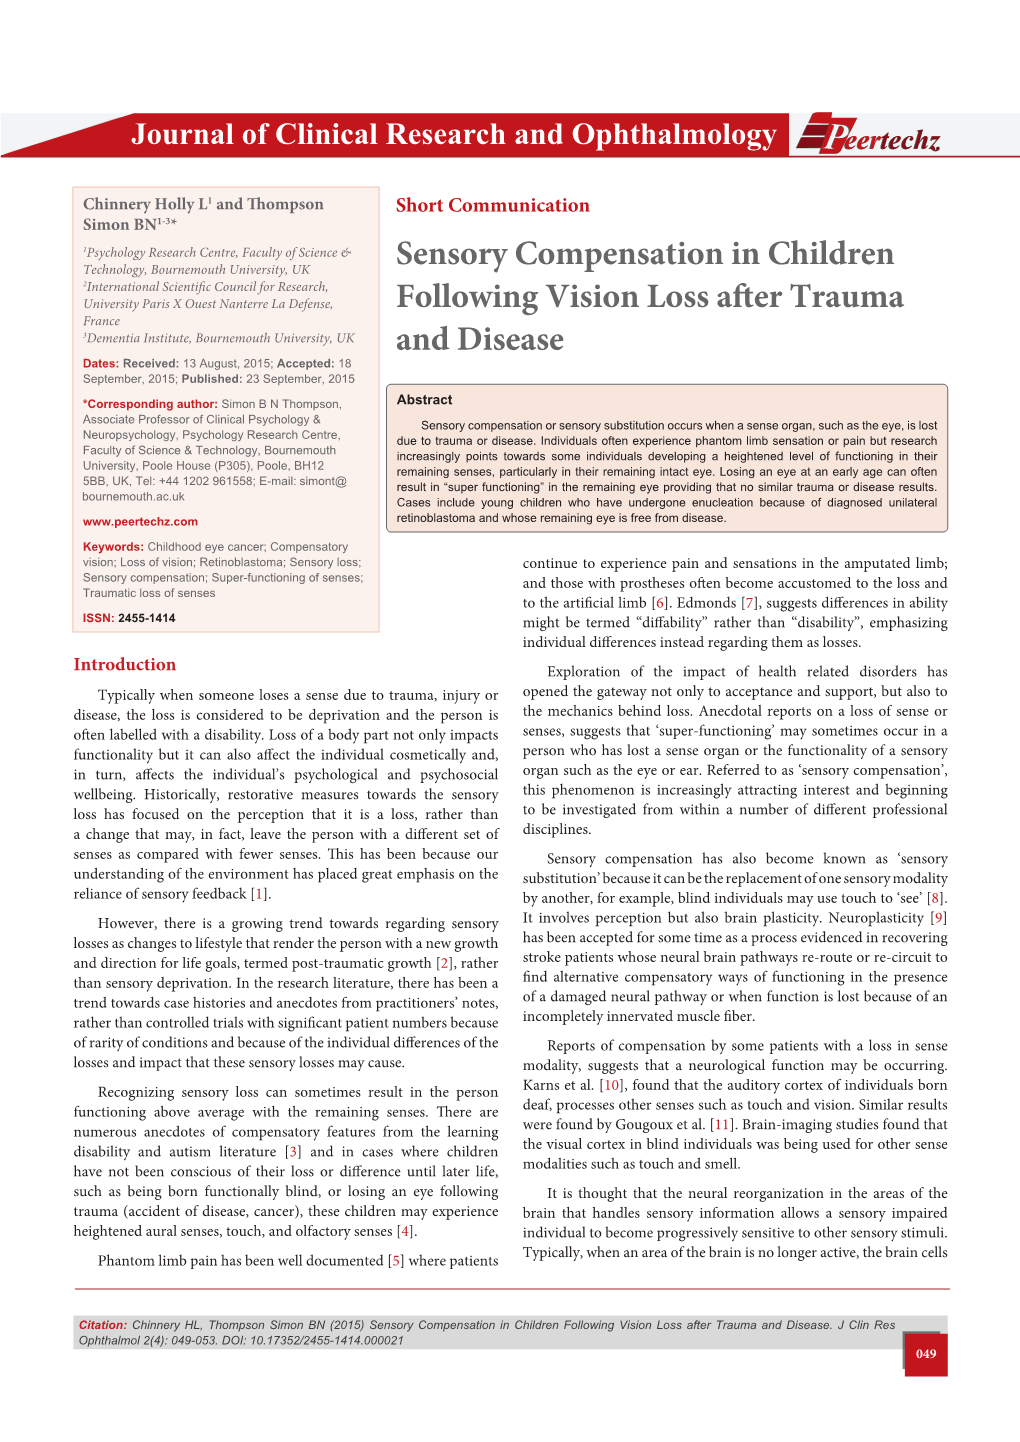 Sensory Compensation in Children Following Vision Loss After Trauma and Disease